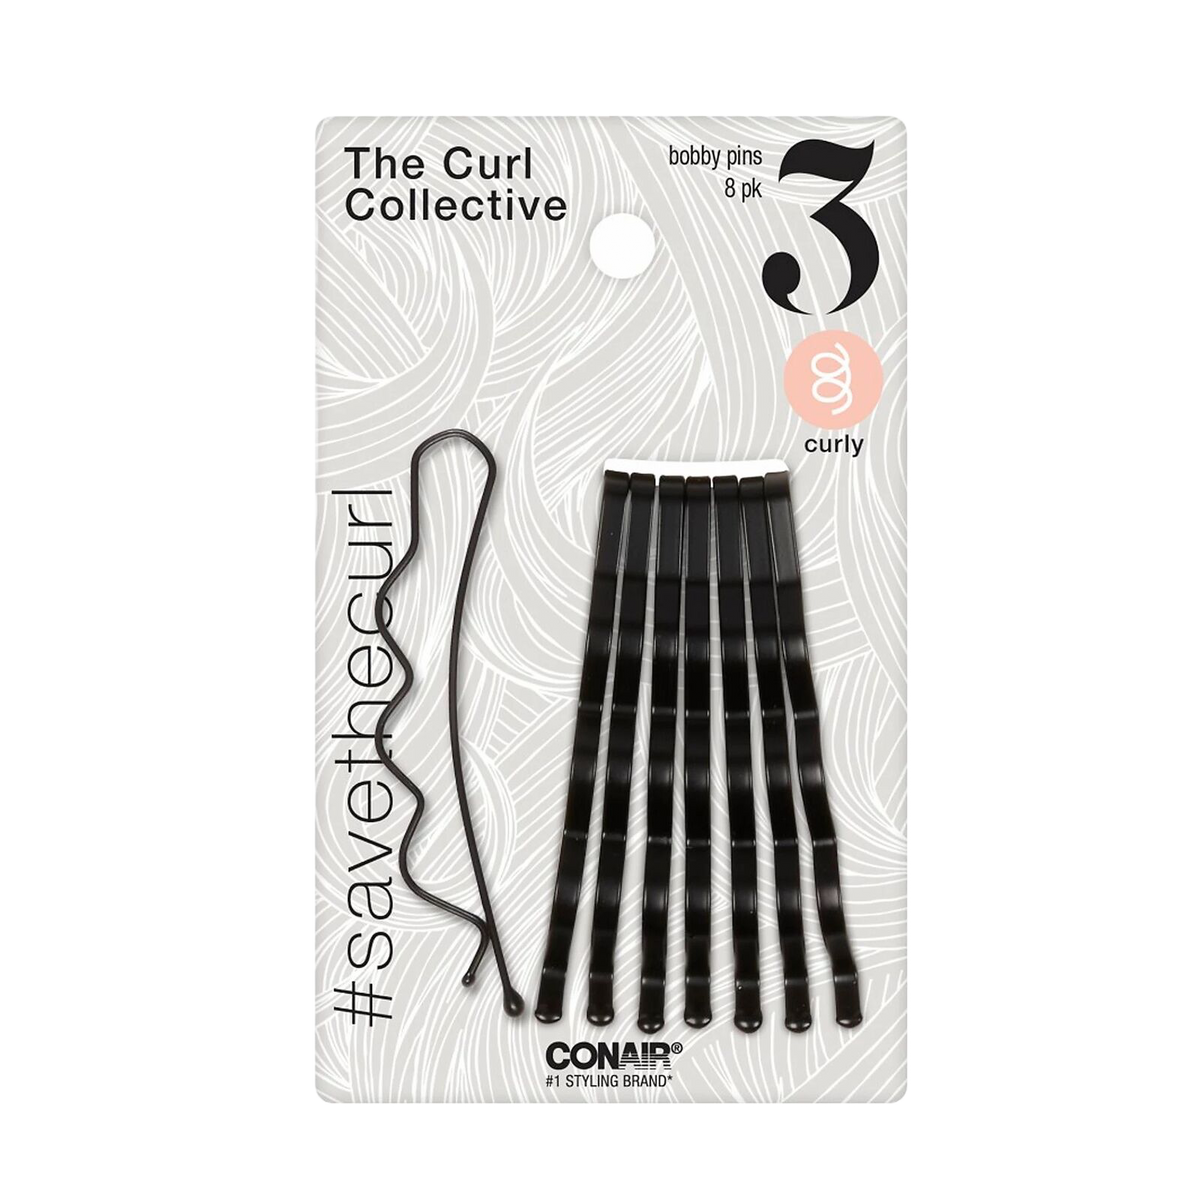 Conair Scunci Curl Collective Bobby Pins | Type 3 | Curly Hair | 8 pieces